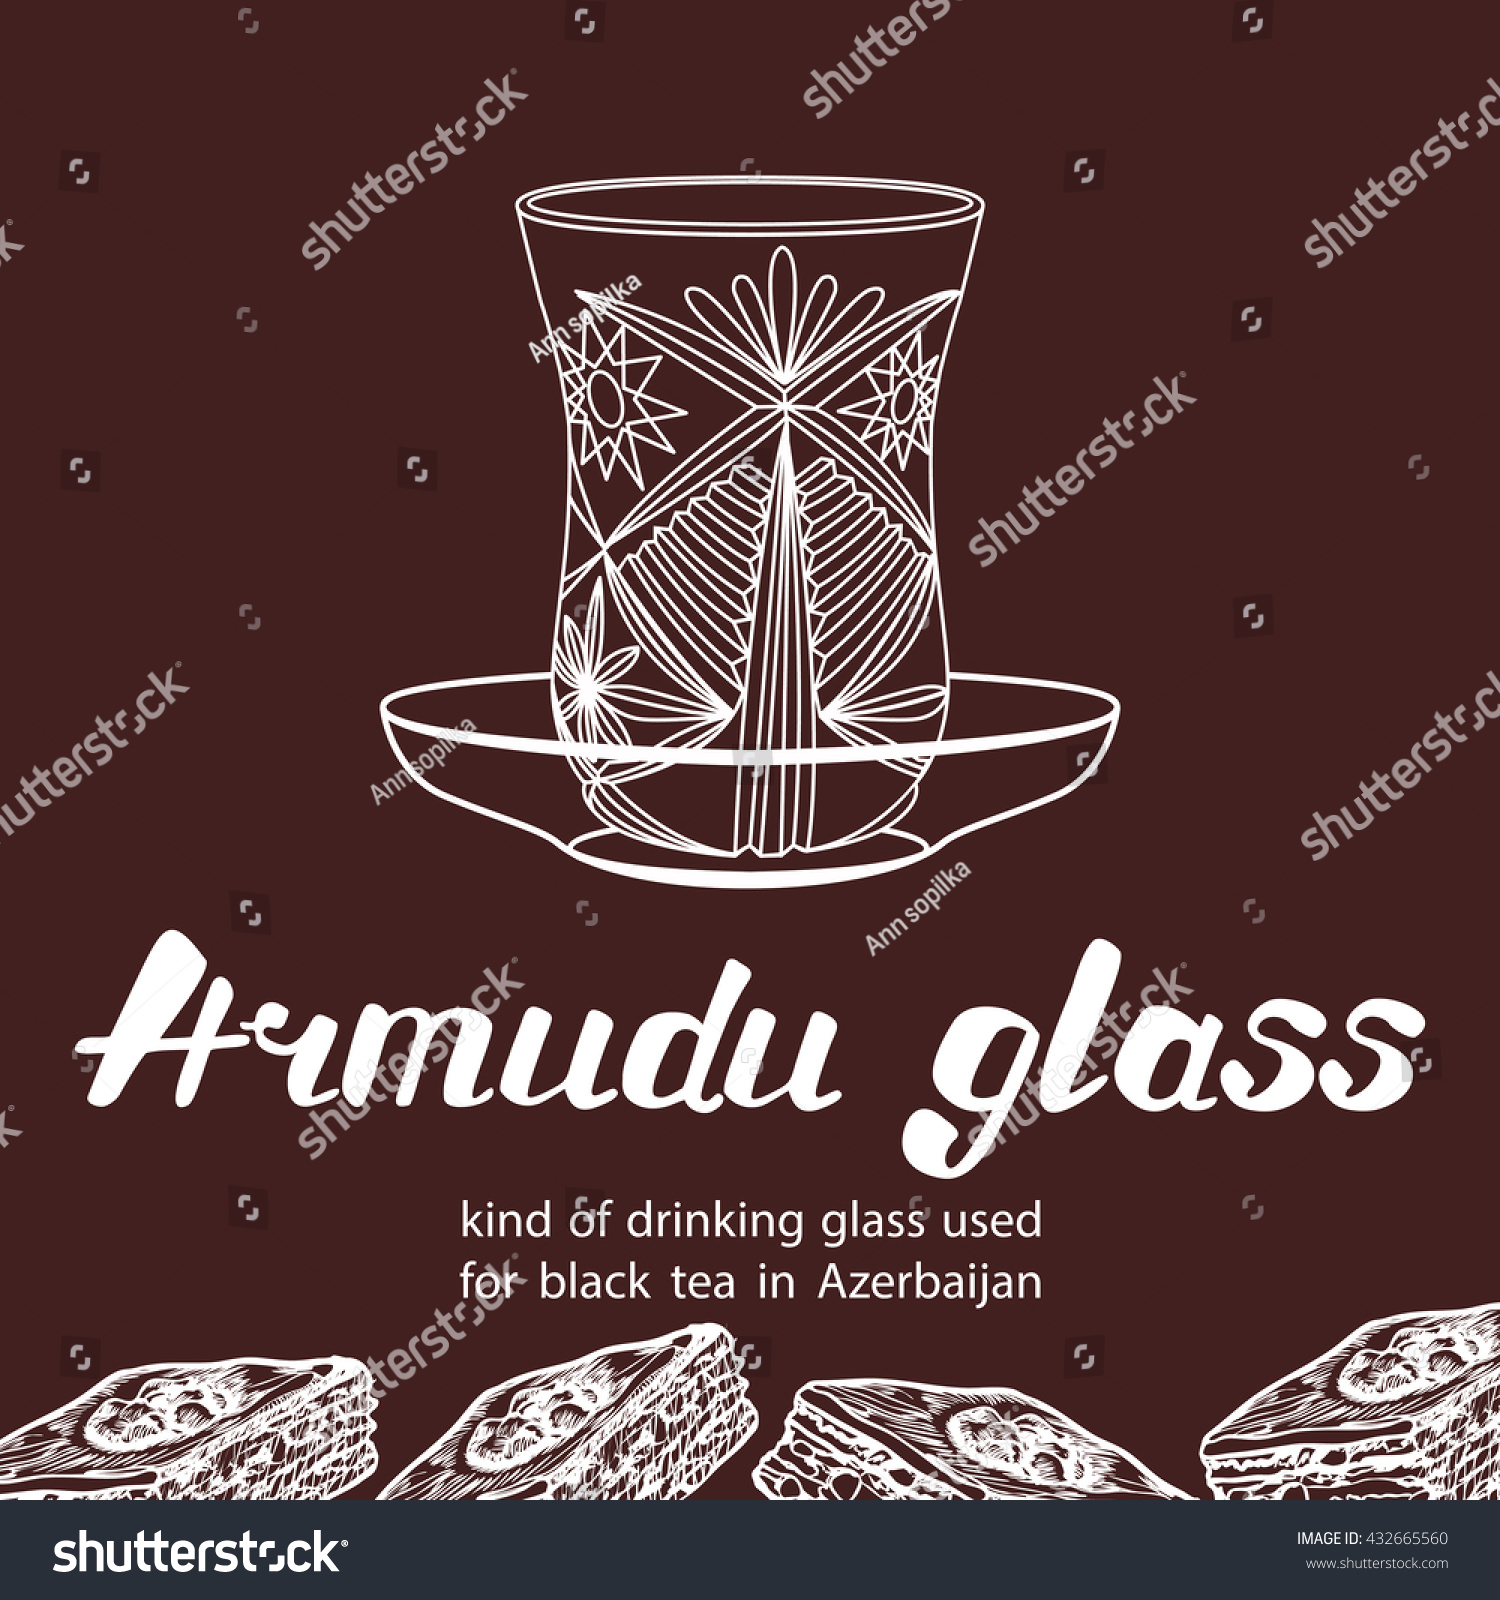 Armudu Glass Kind Drinking Glass Used Stock Vector Royalty Free